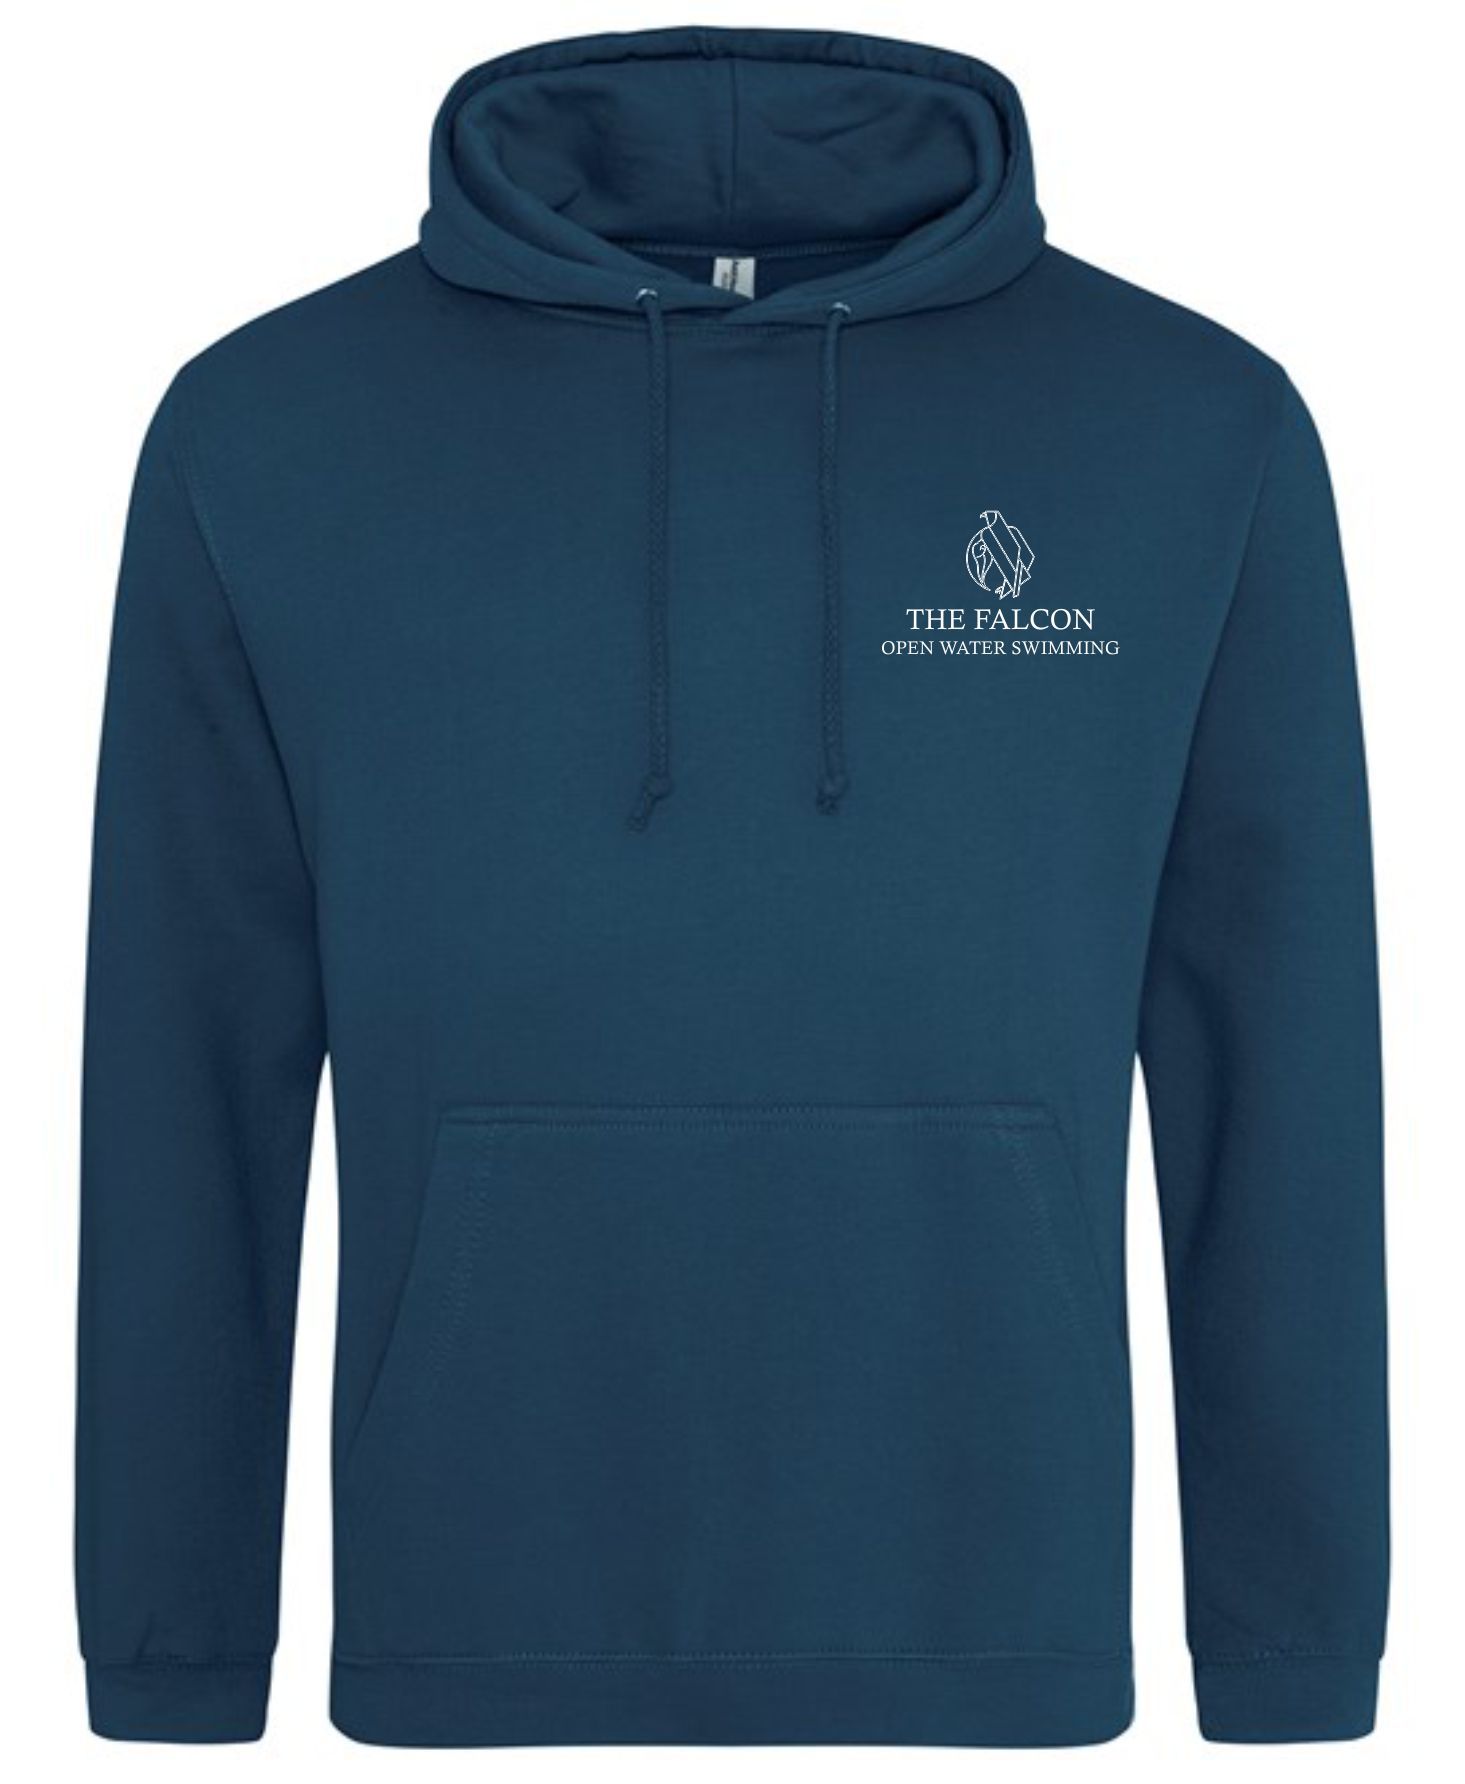 The Falcon Open Water Swimming - Blue Falcon Hoodie (Unisex)